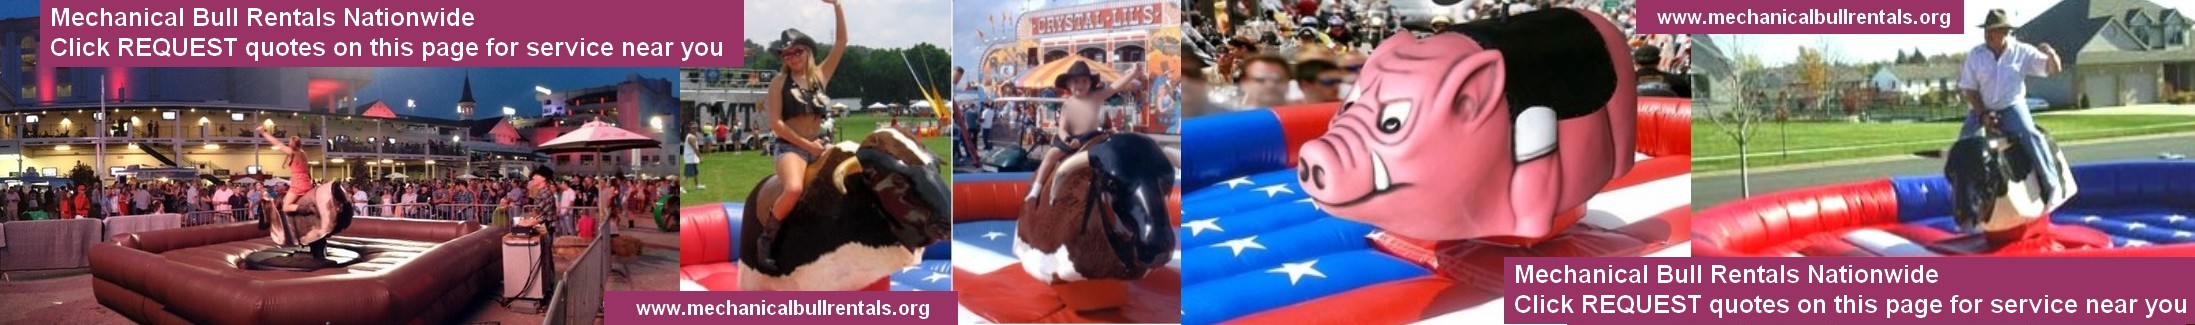 Mechanical Bull Rentals Long Island-The Hamptons New York NY and near you. Free referrals to local mechanical bull companies LOGO